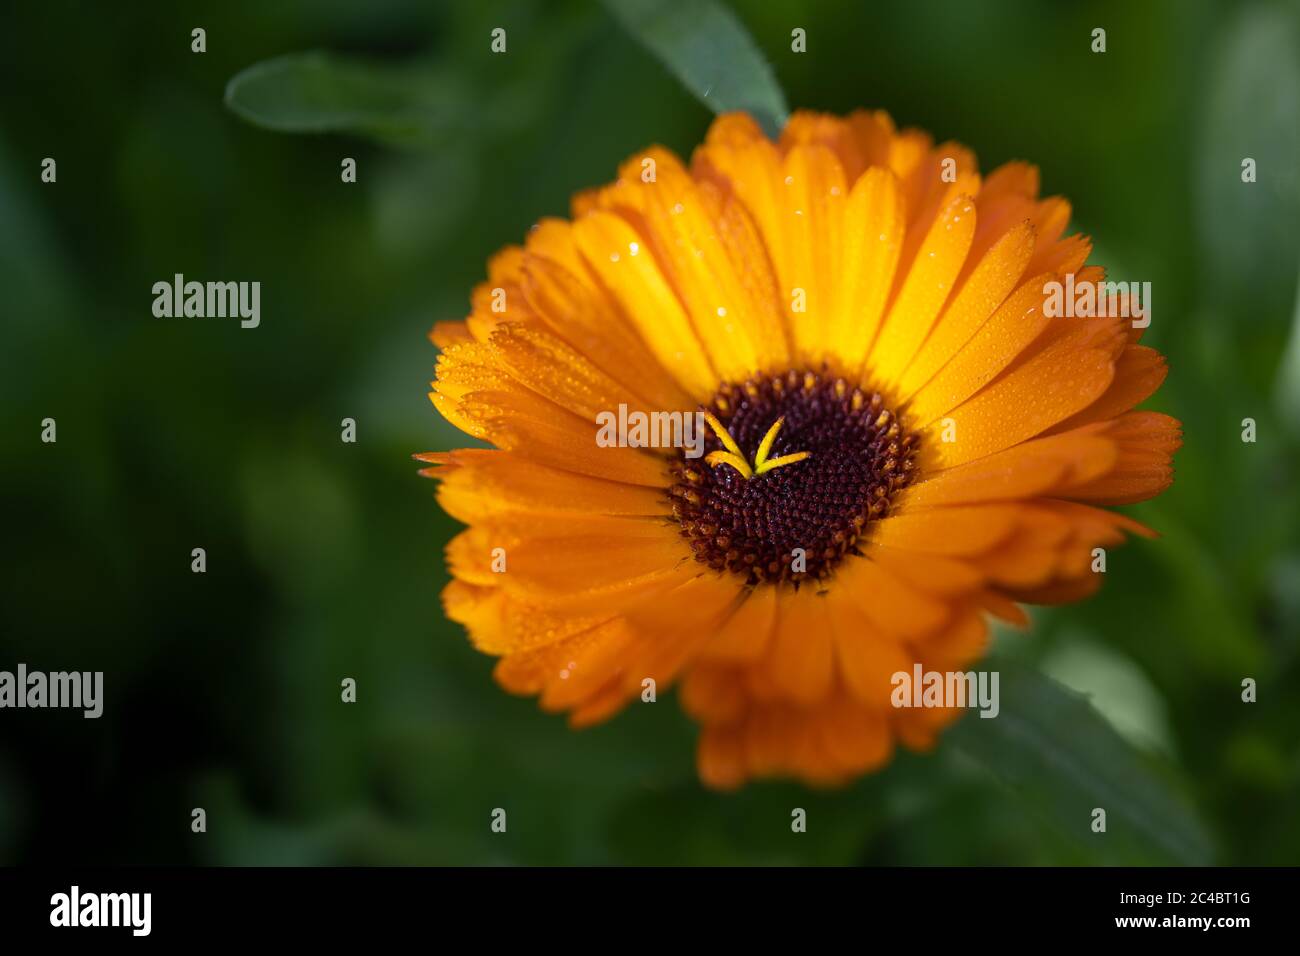 Orange flower with dewdrops of common marigold (Calendula officinalis) from the the daisy family, edible garden plant and medicinal herb for cosmetics Stock Photo